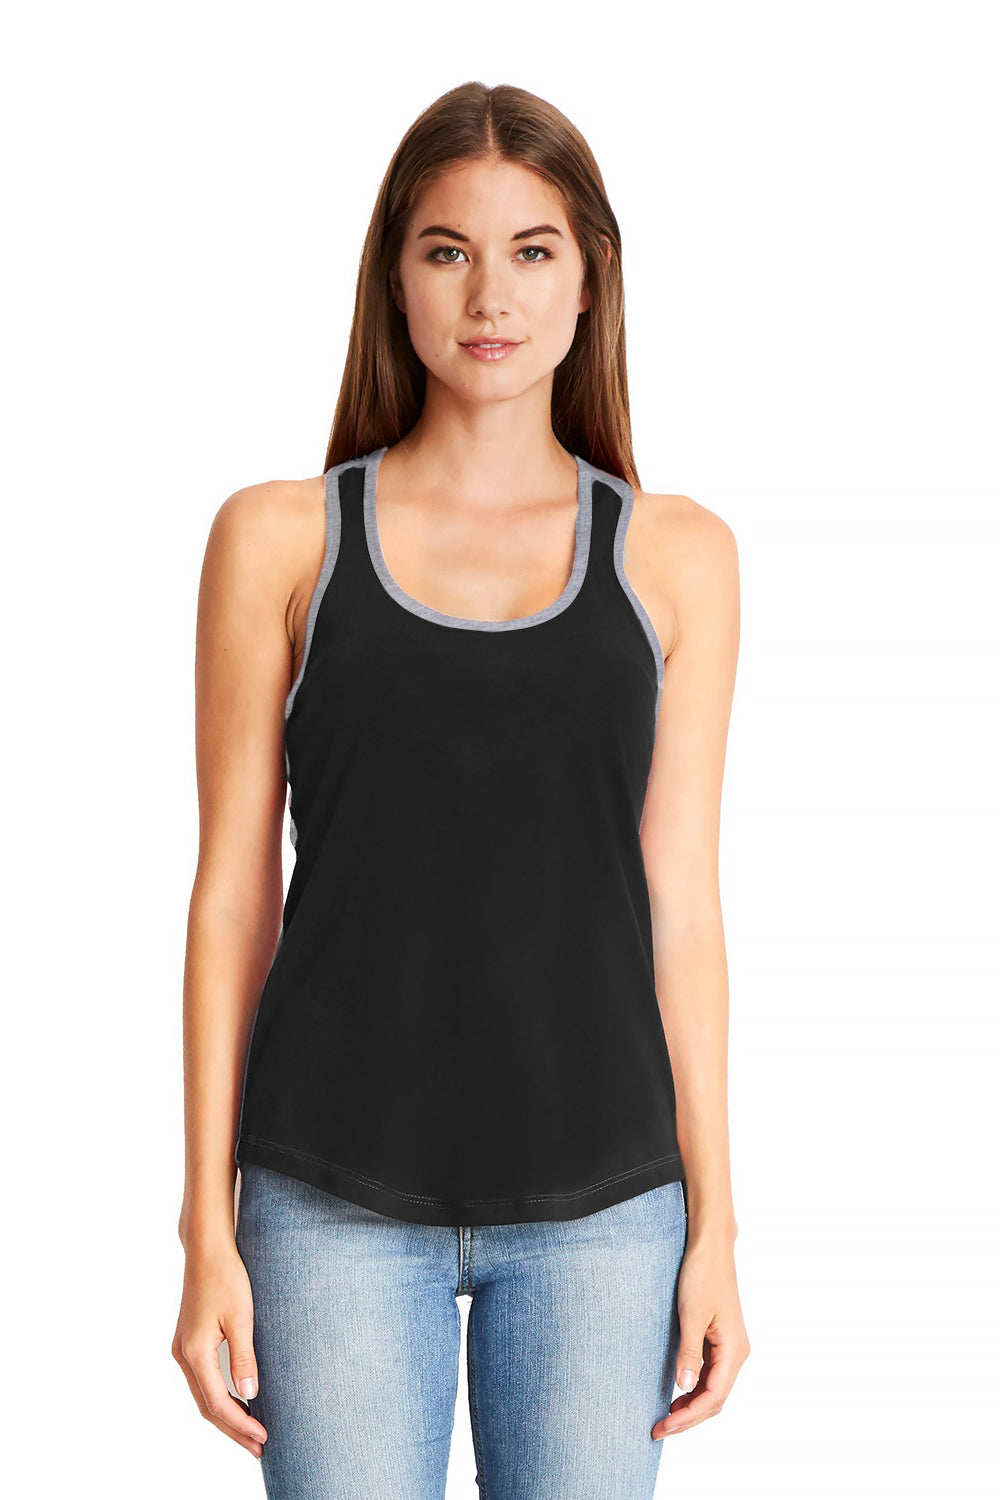 Next Level 1534 Womens Ideal Tank Top Black/Grey Front